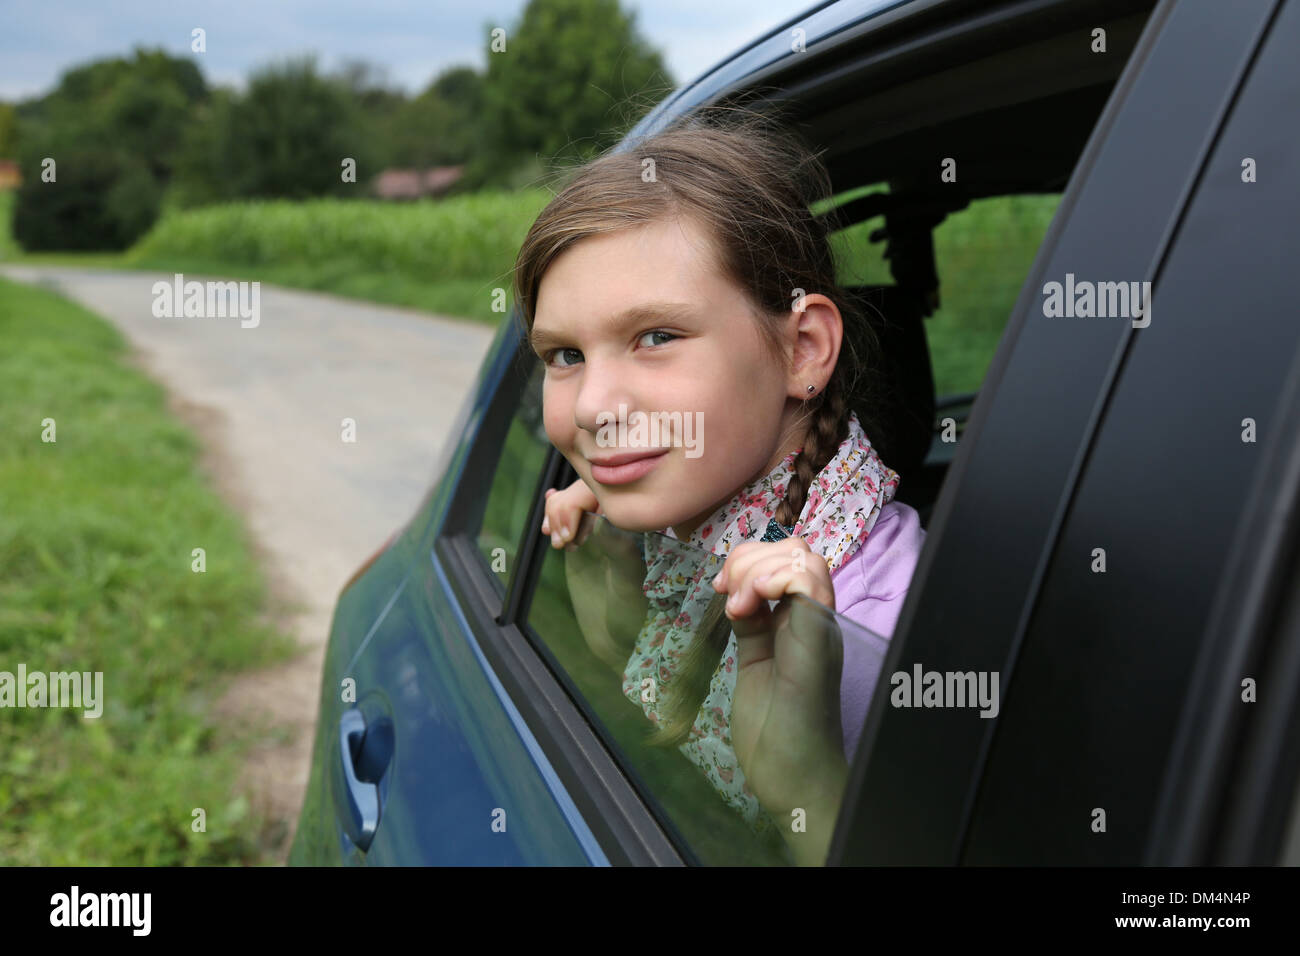 Young girl looking out of a car while traveling Stock Photo